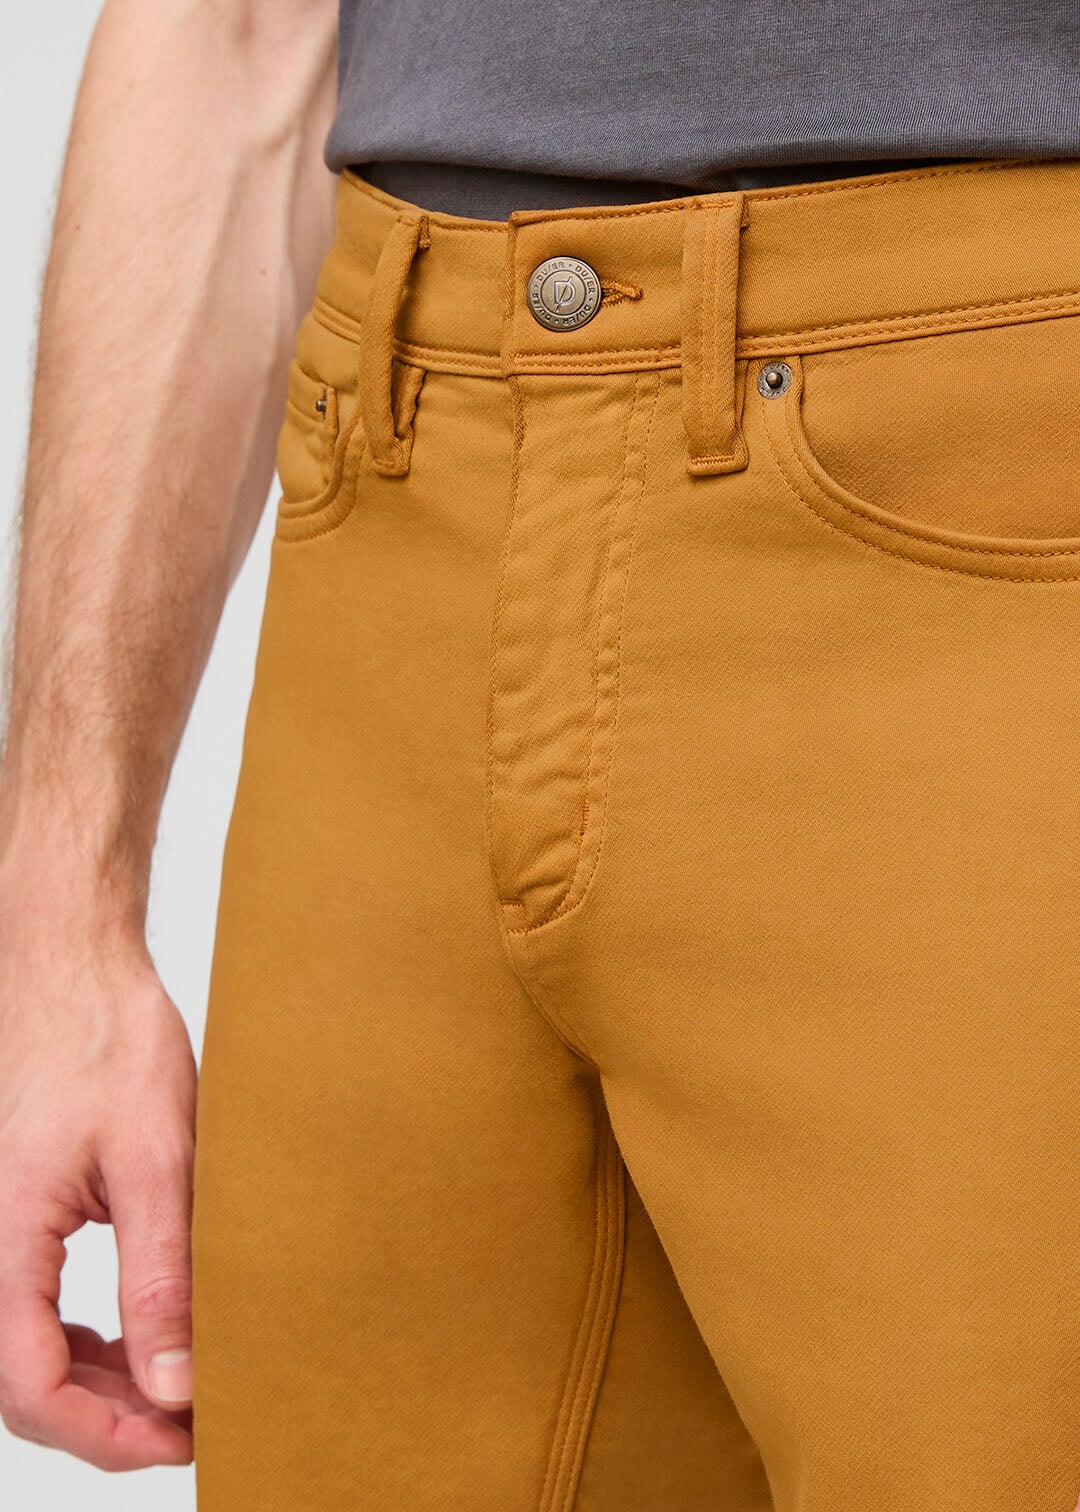 mens yellow slim fit performance short front waistband detail